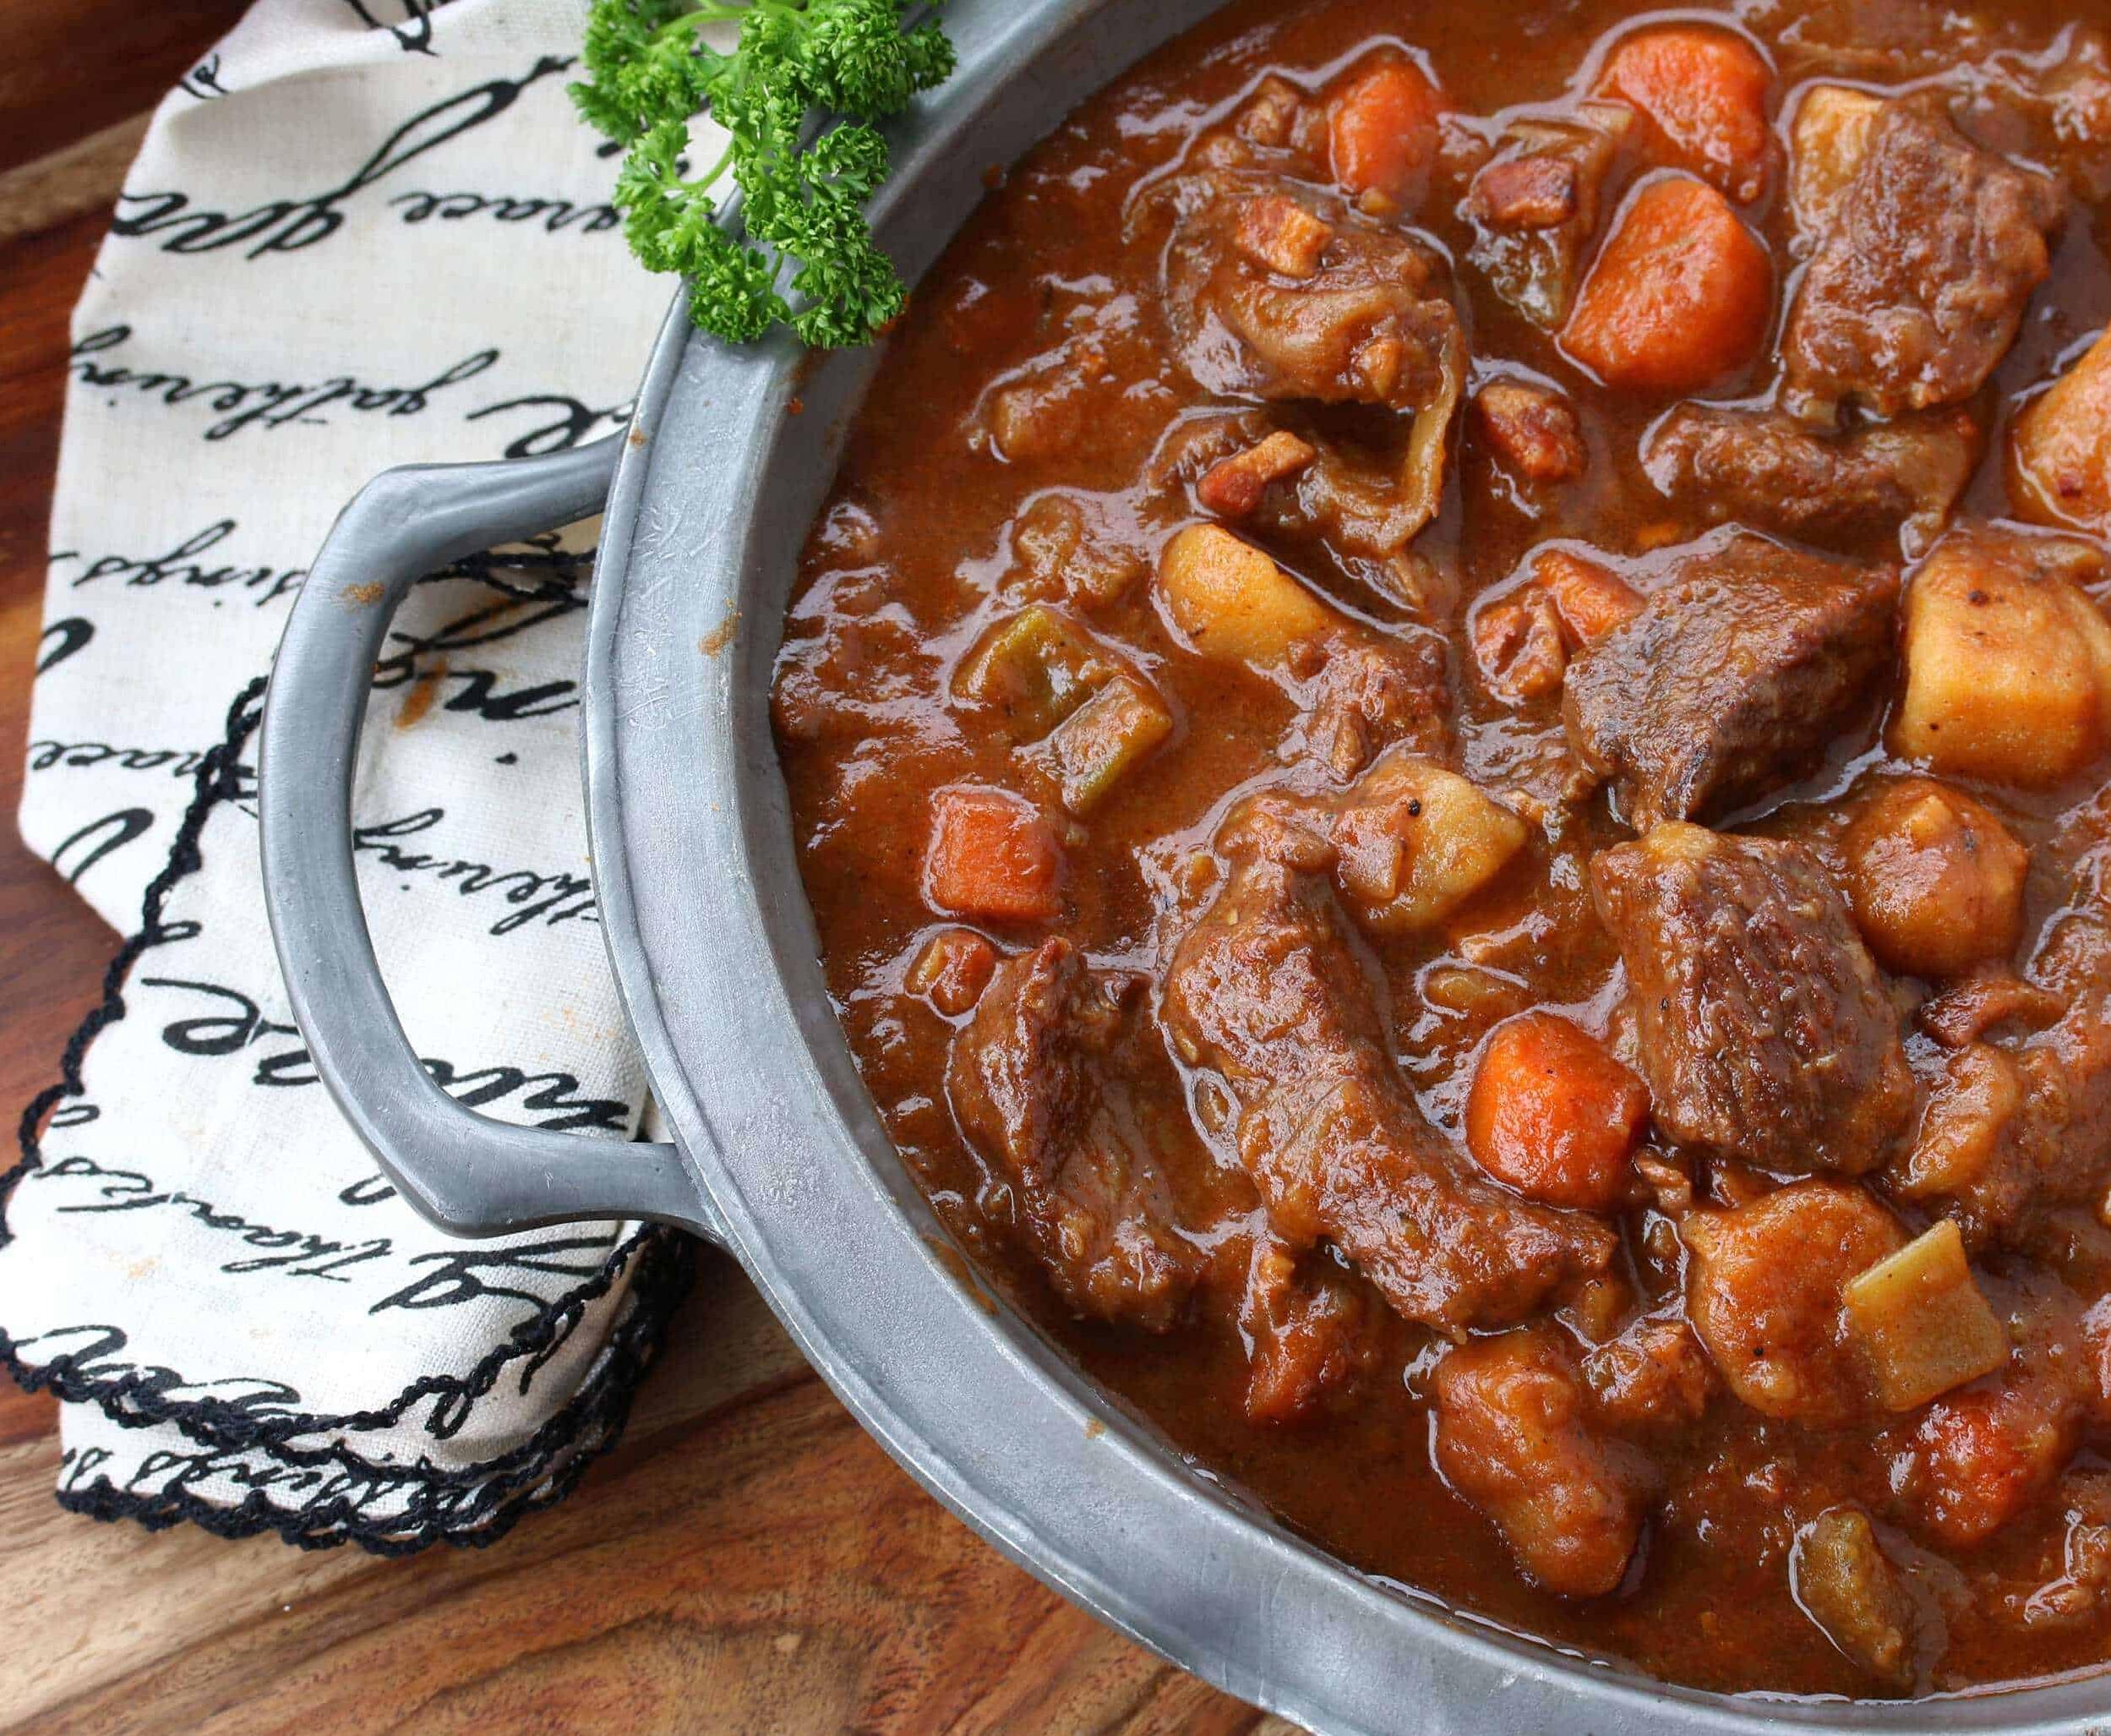  The hearty chunks of meat and veggies make this stew a meal in itself